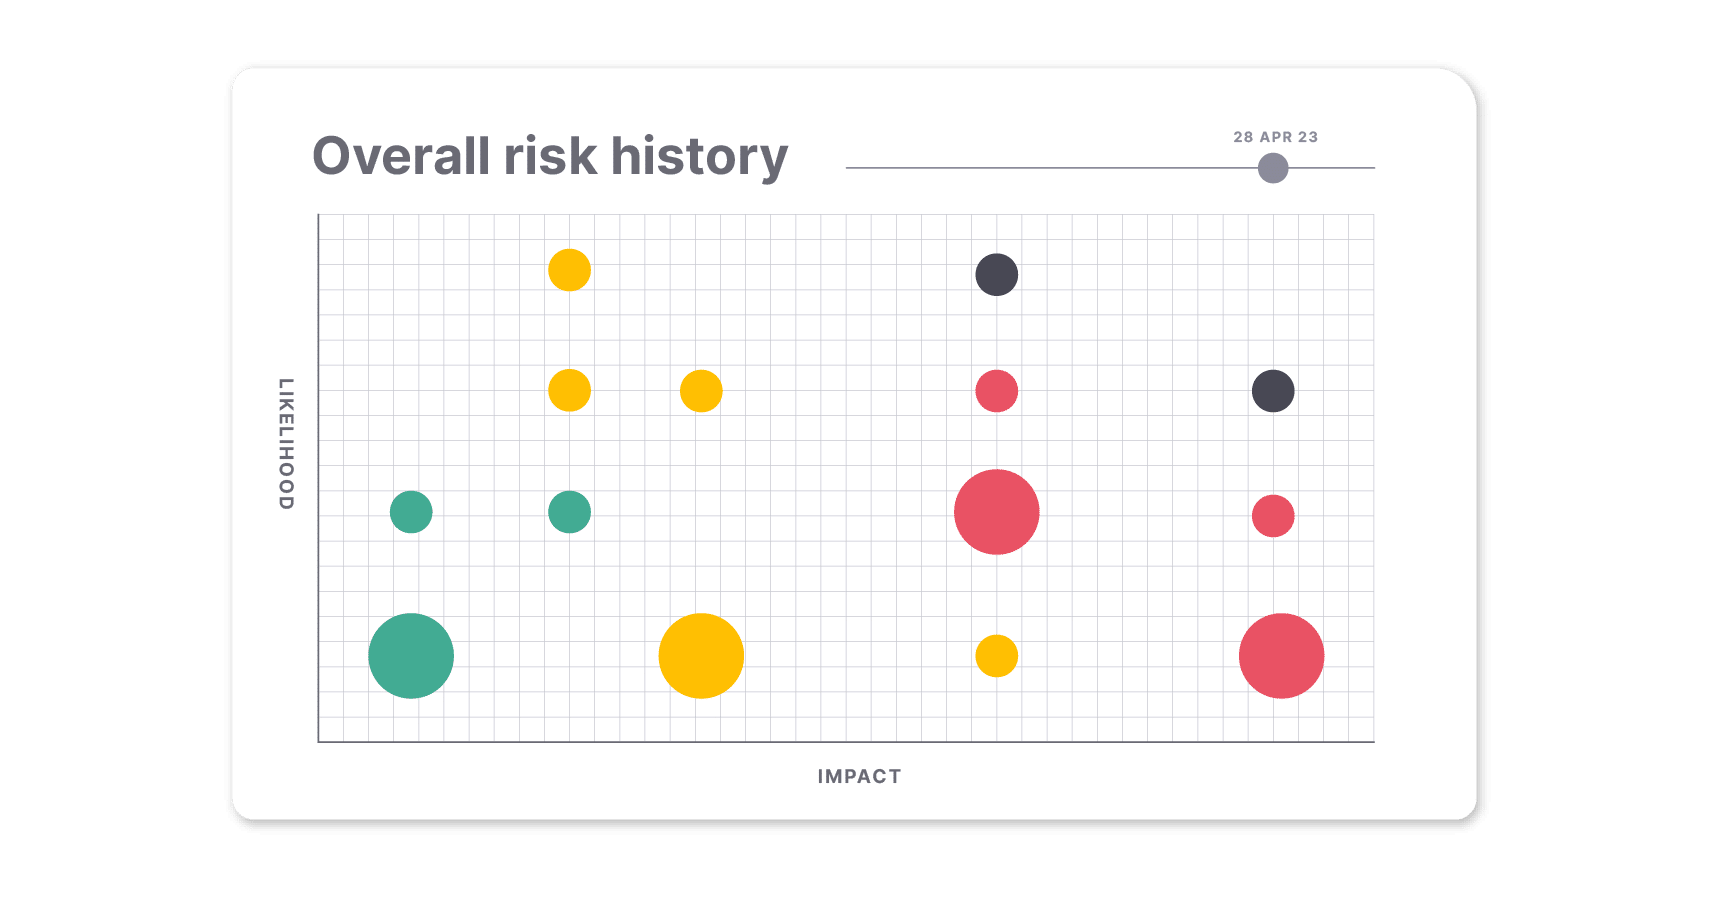 Track how your risks have evolved over time with the Overall Risk History graph